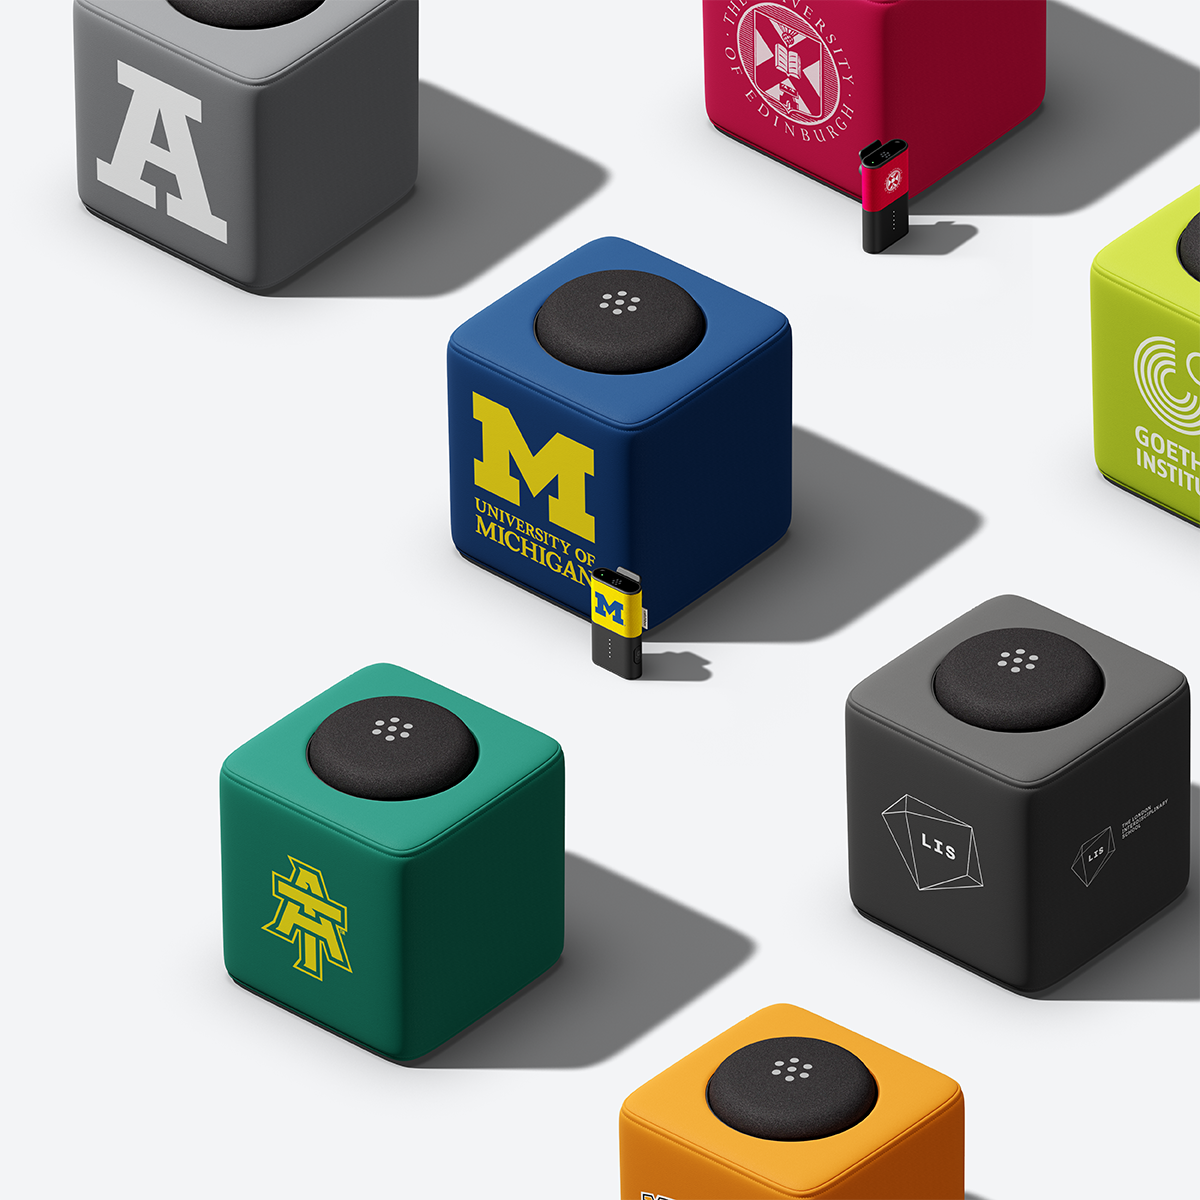 Catchbox microphone customized with colors and logos